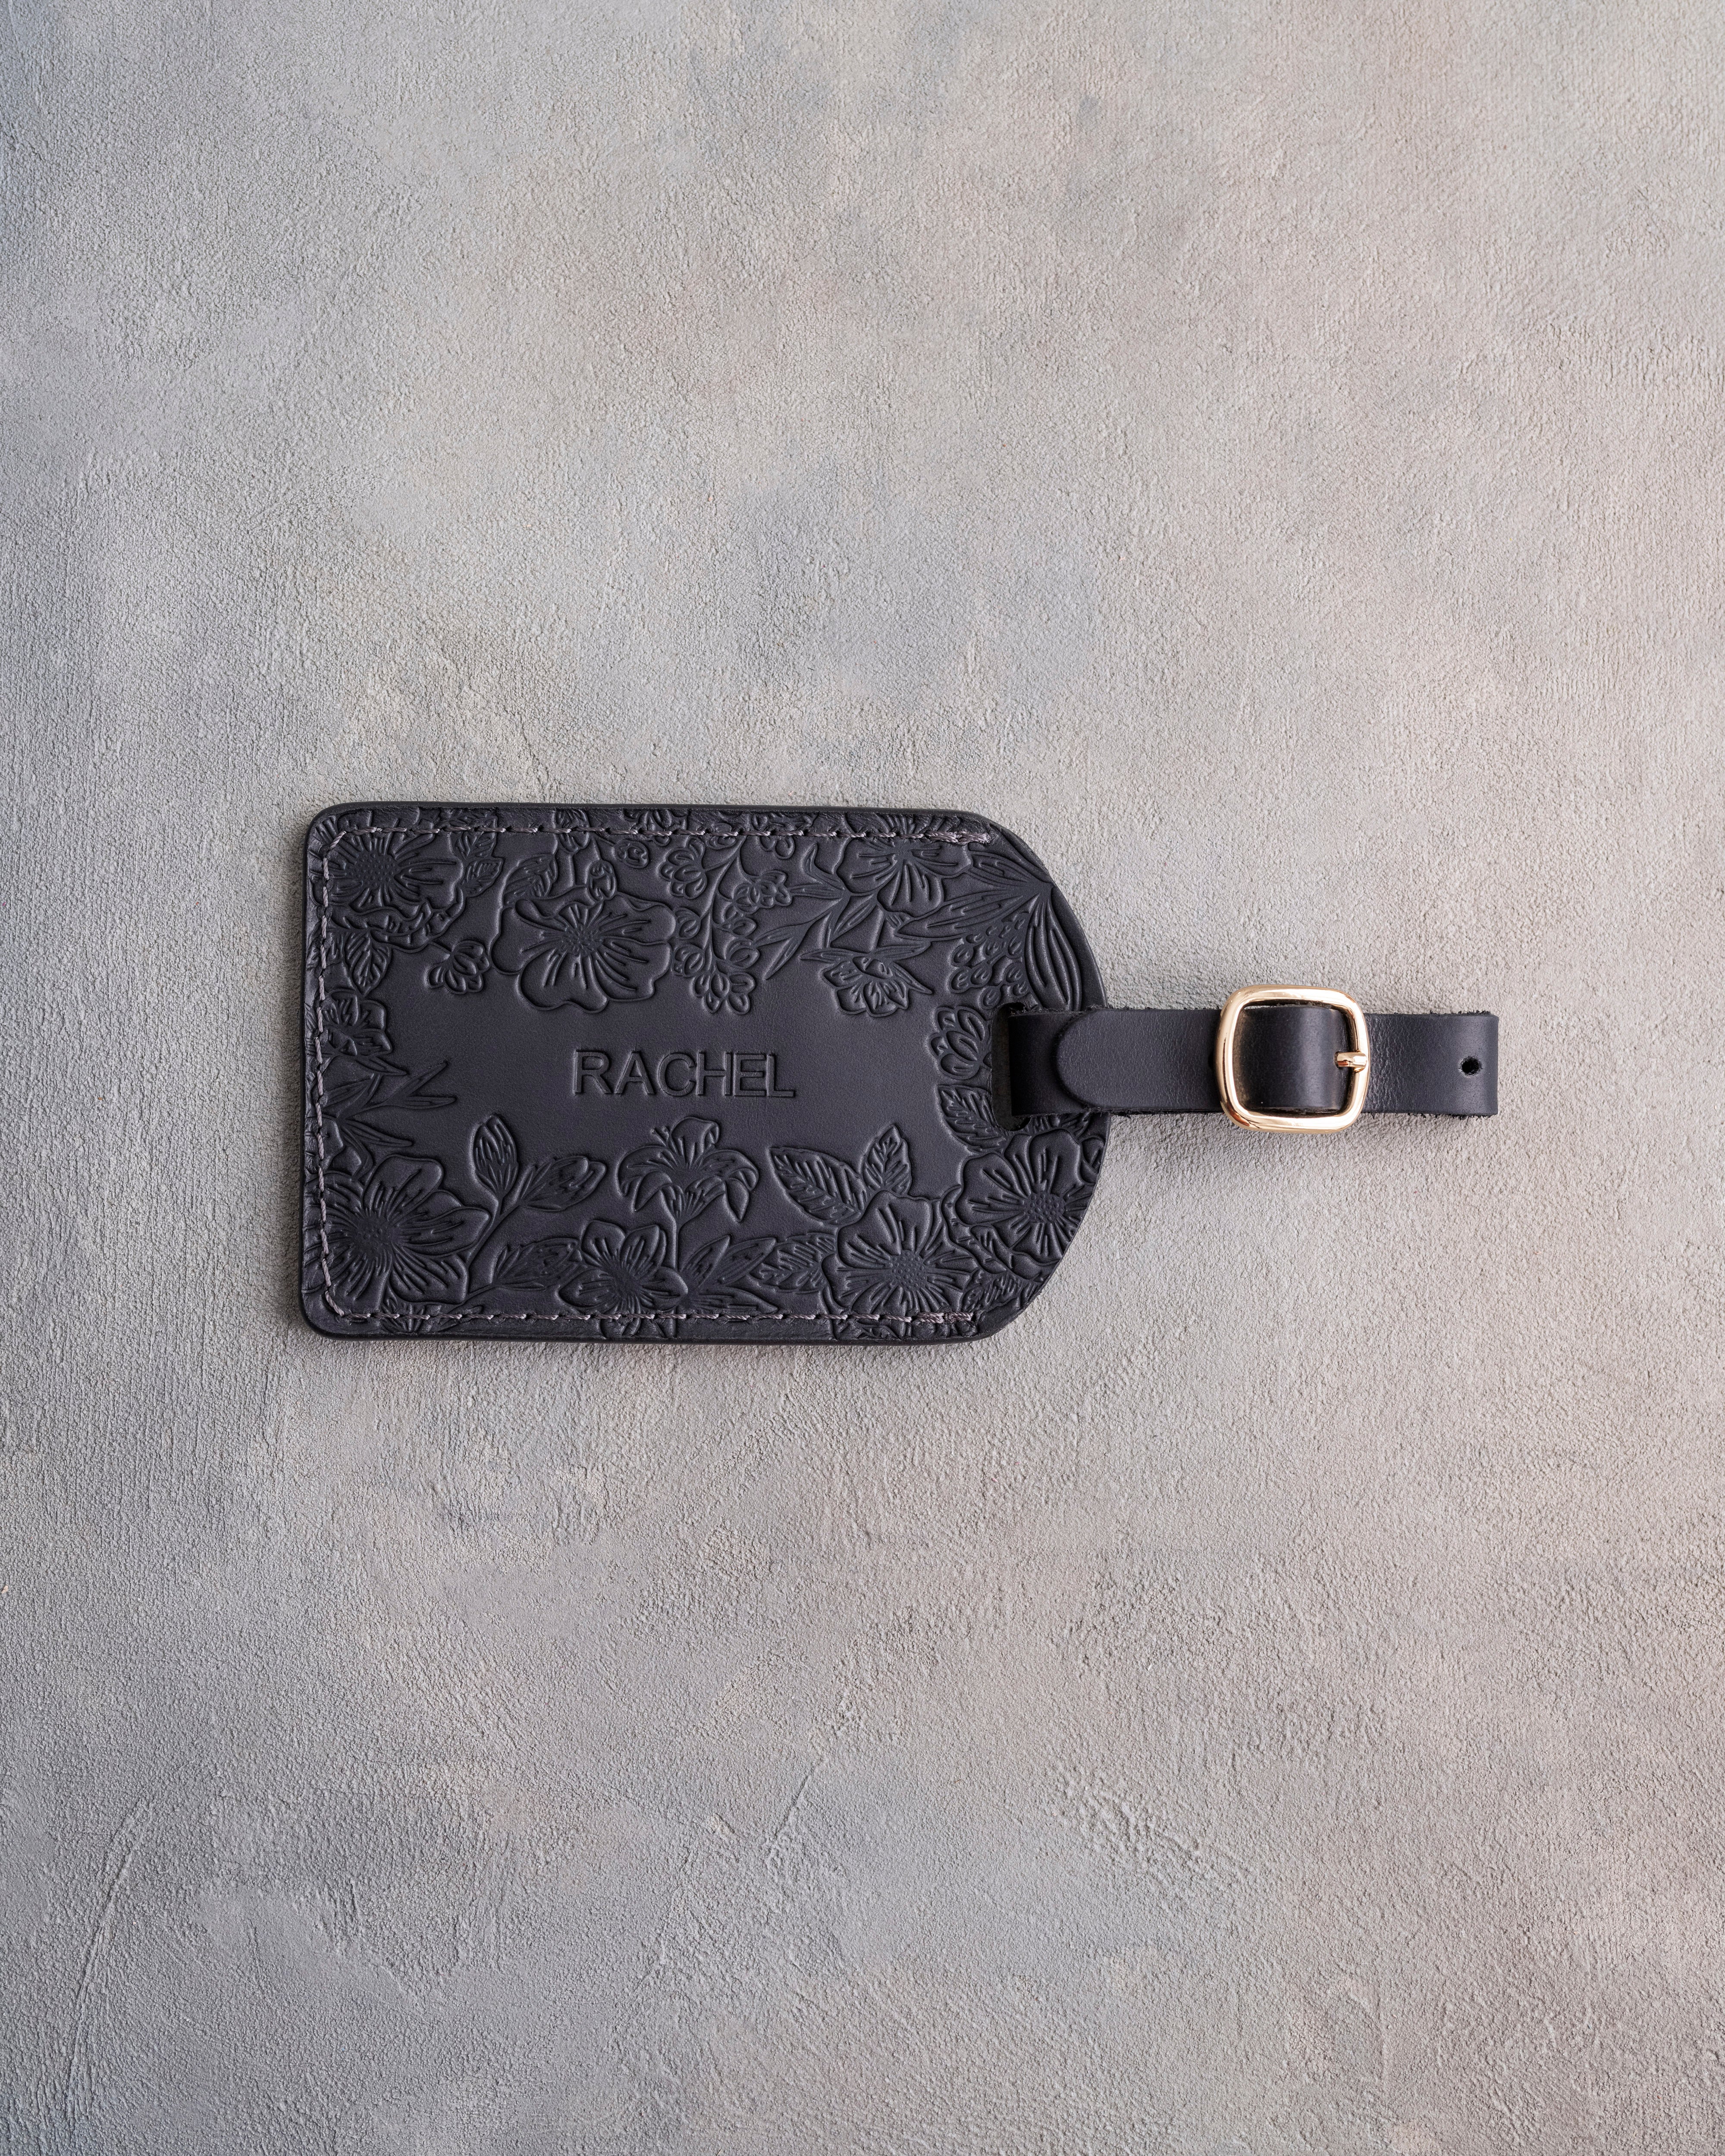 Floral Name Luggage Tag in Black Leather